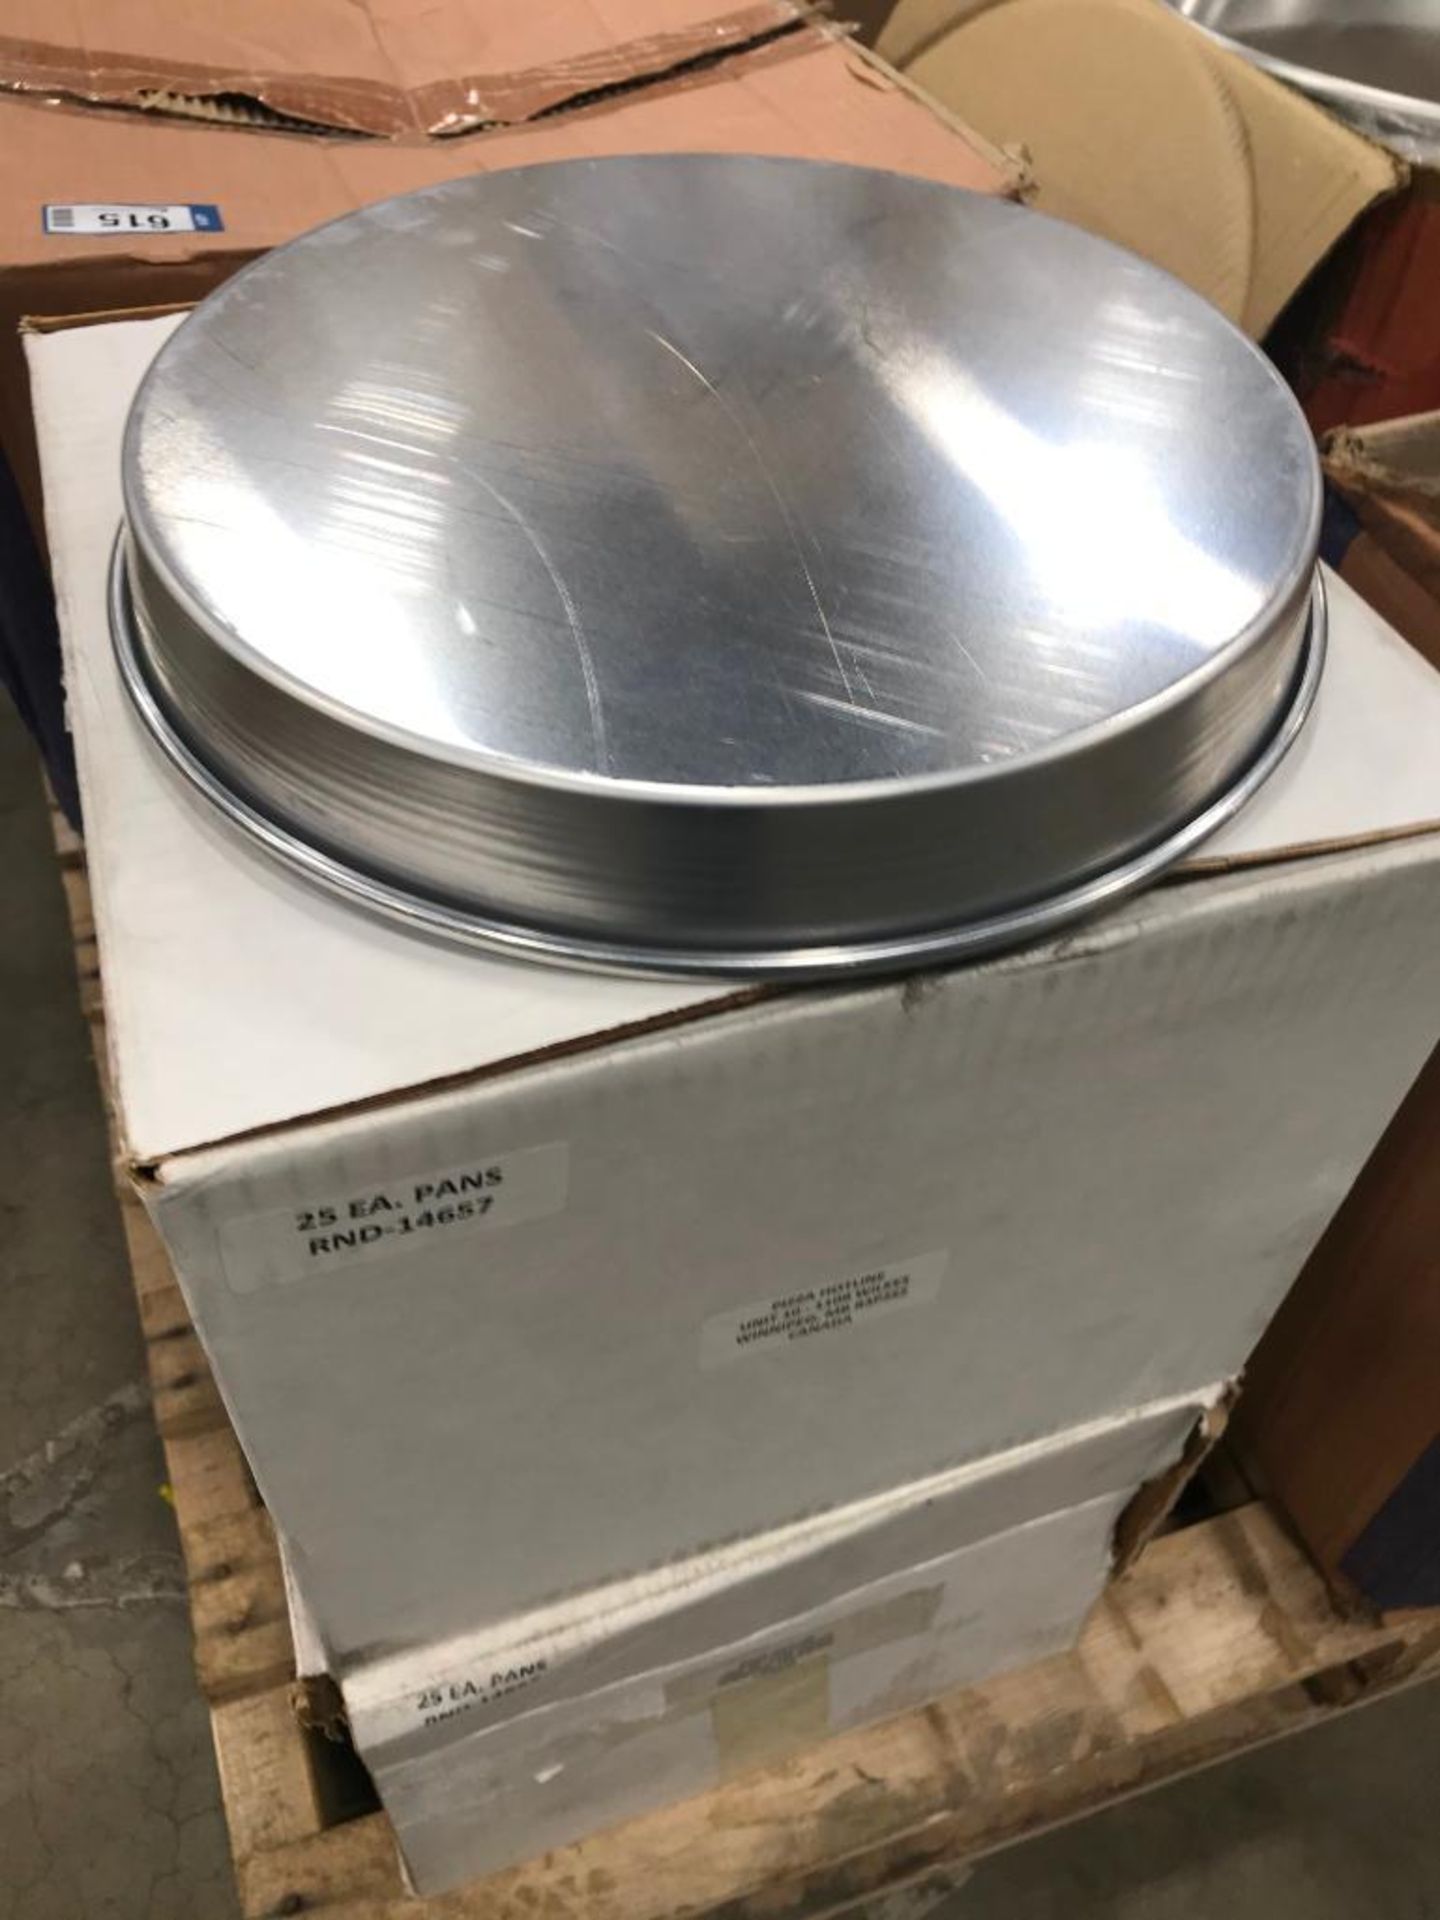 TWO CASE OF 11" PIZZA PANS - 25 PANS PER CASE - NEW - Image 2 of 3